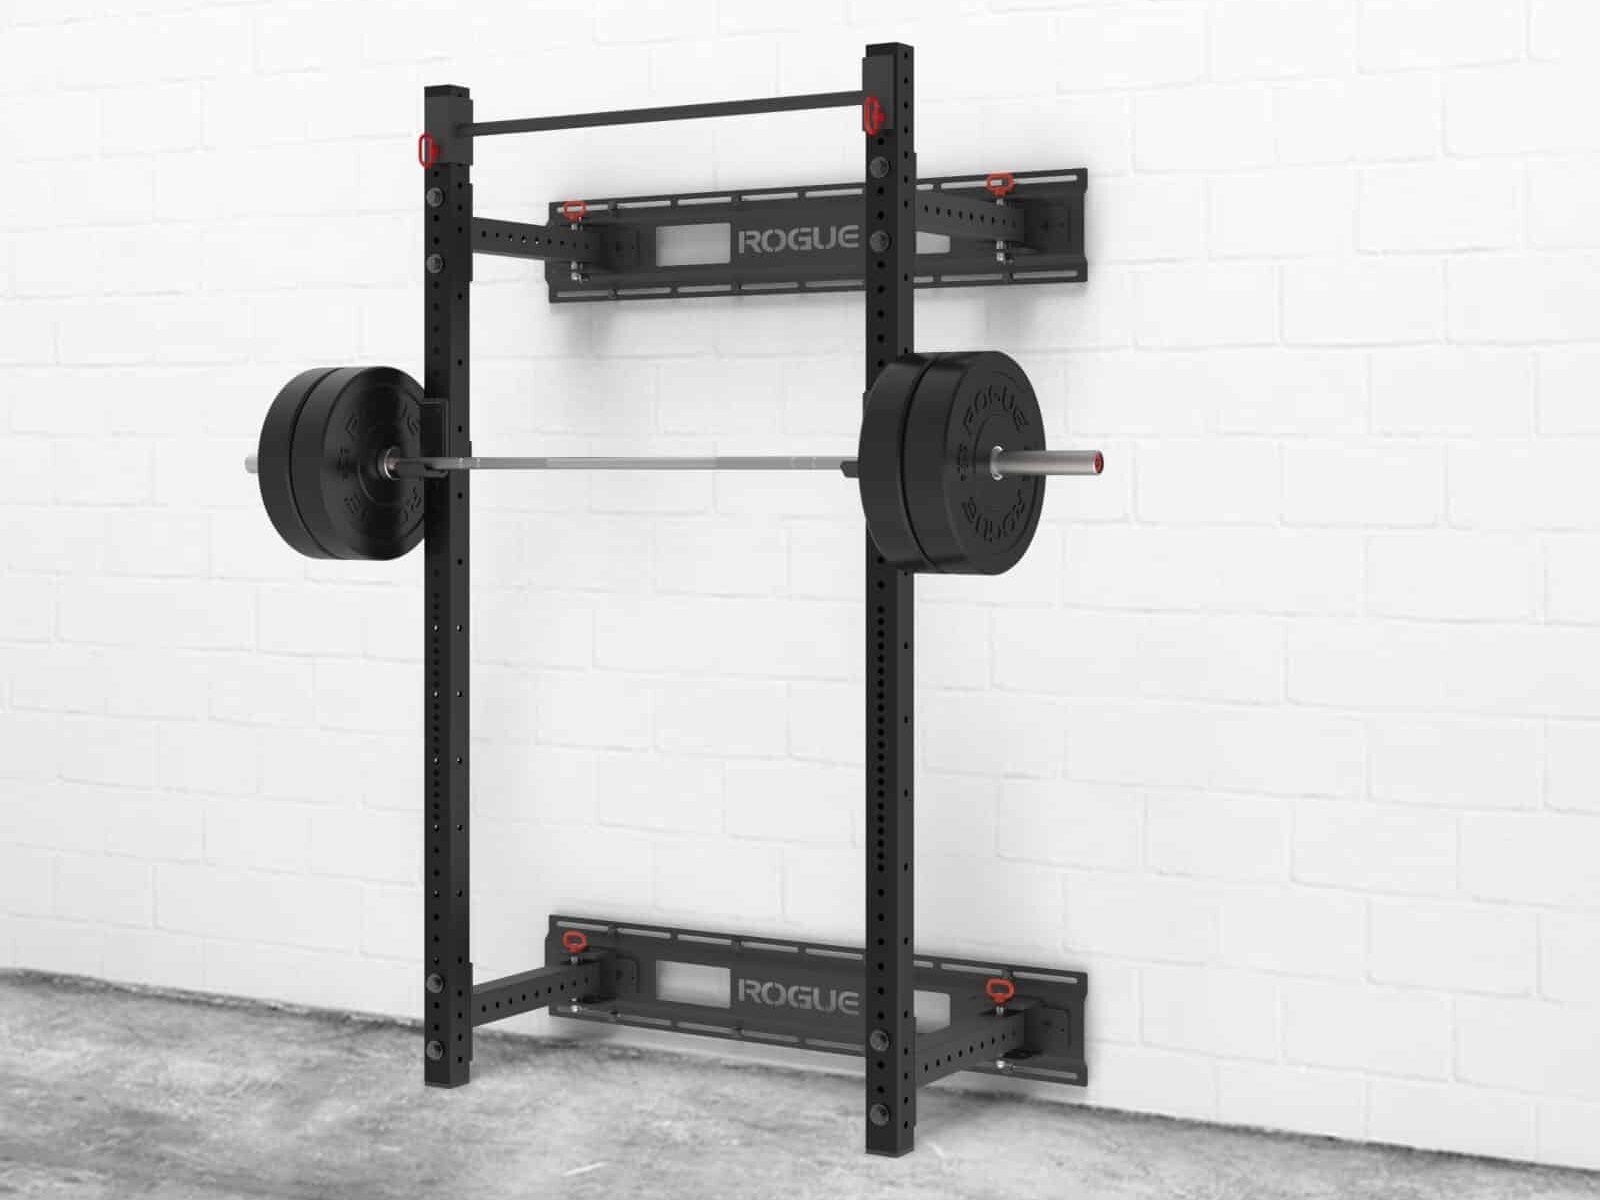 rogue wall mounted folding rack with weights loaded